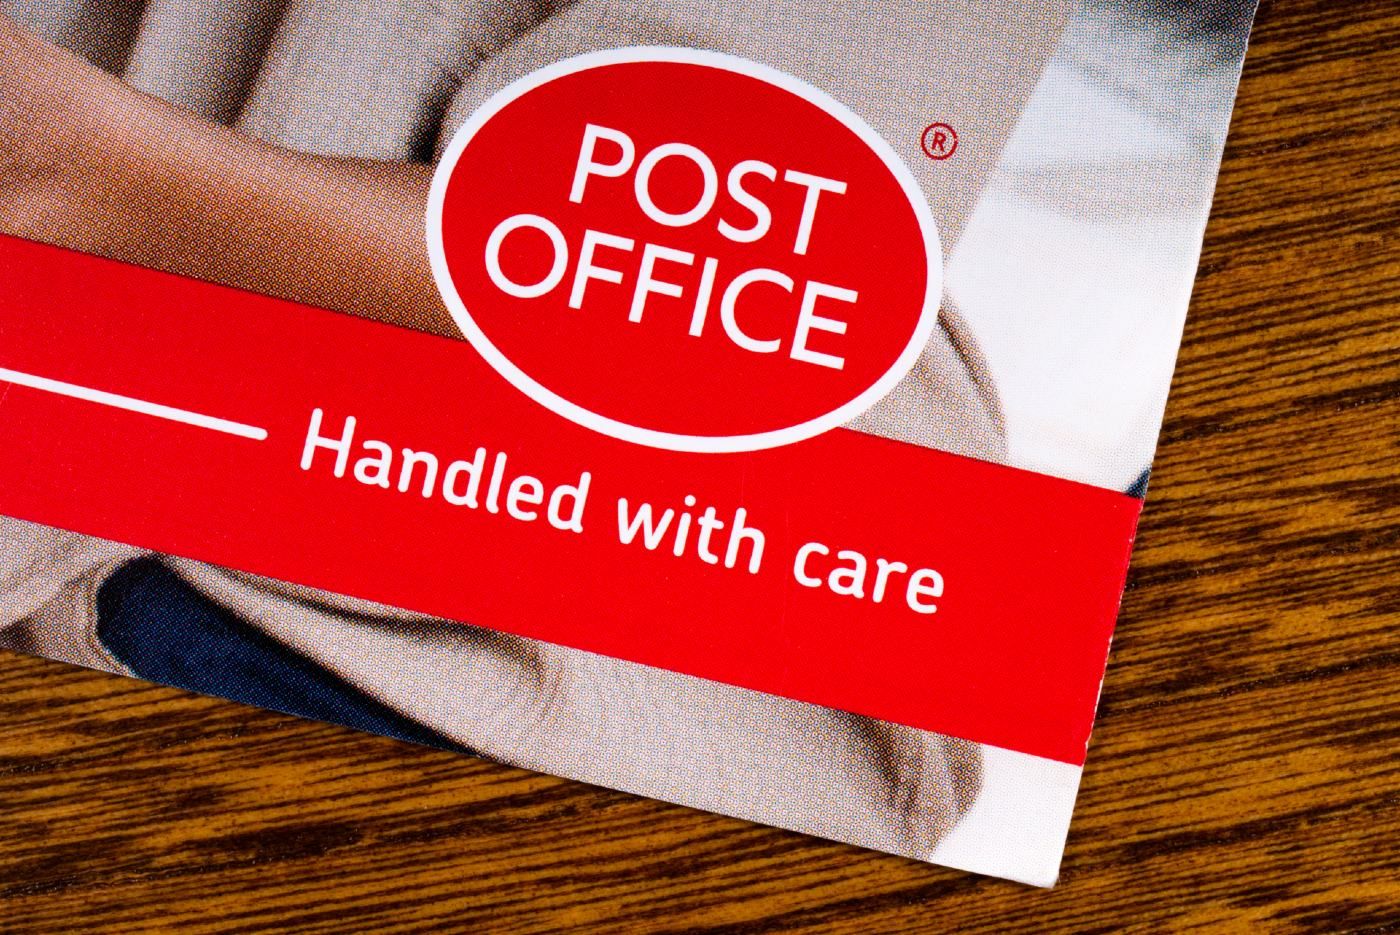 A card has the Post Office logo and says "handled with care" - post office horizon compensation